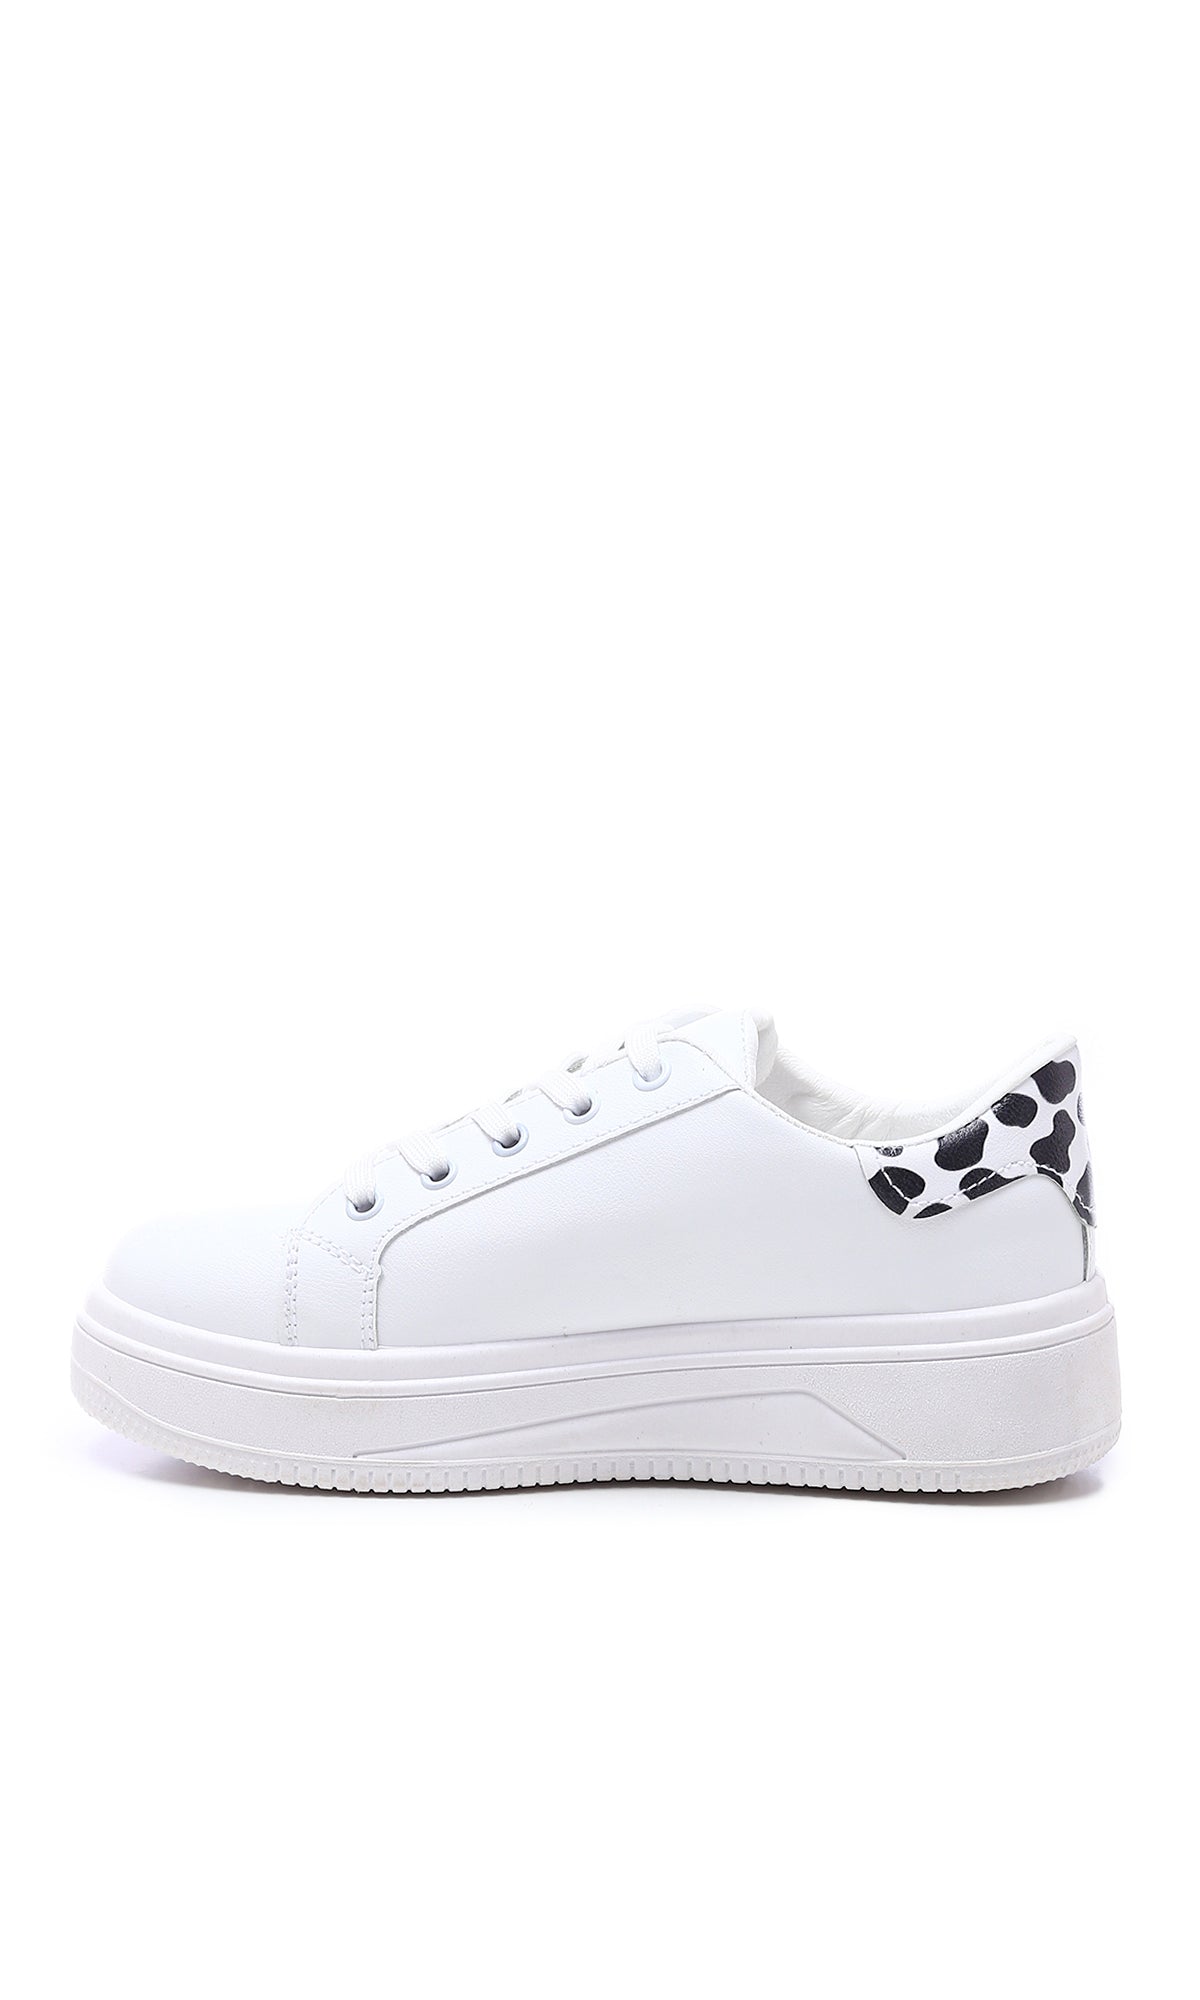 O177888 Round Toecap Sneakers With Cow Back - White